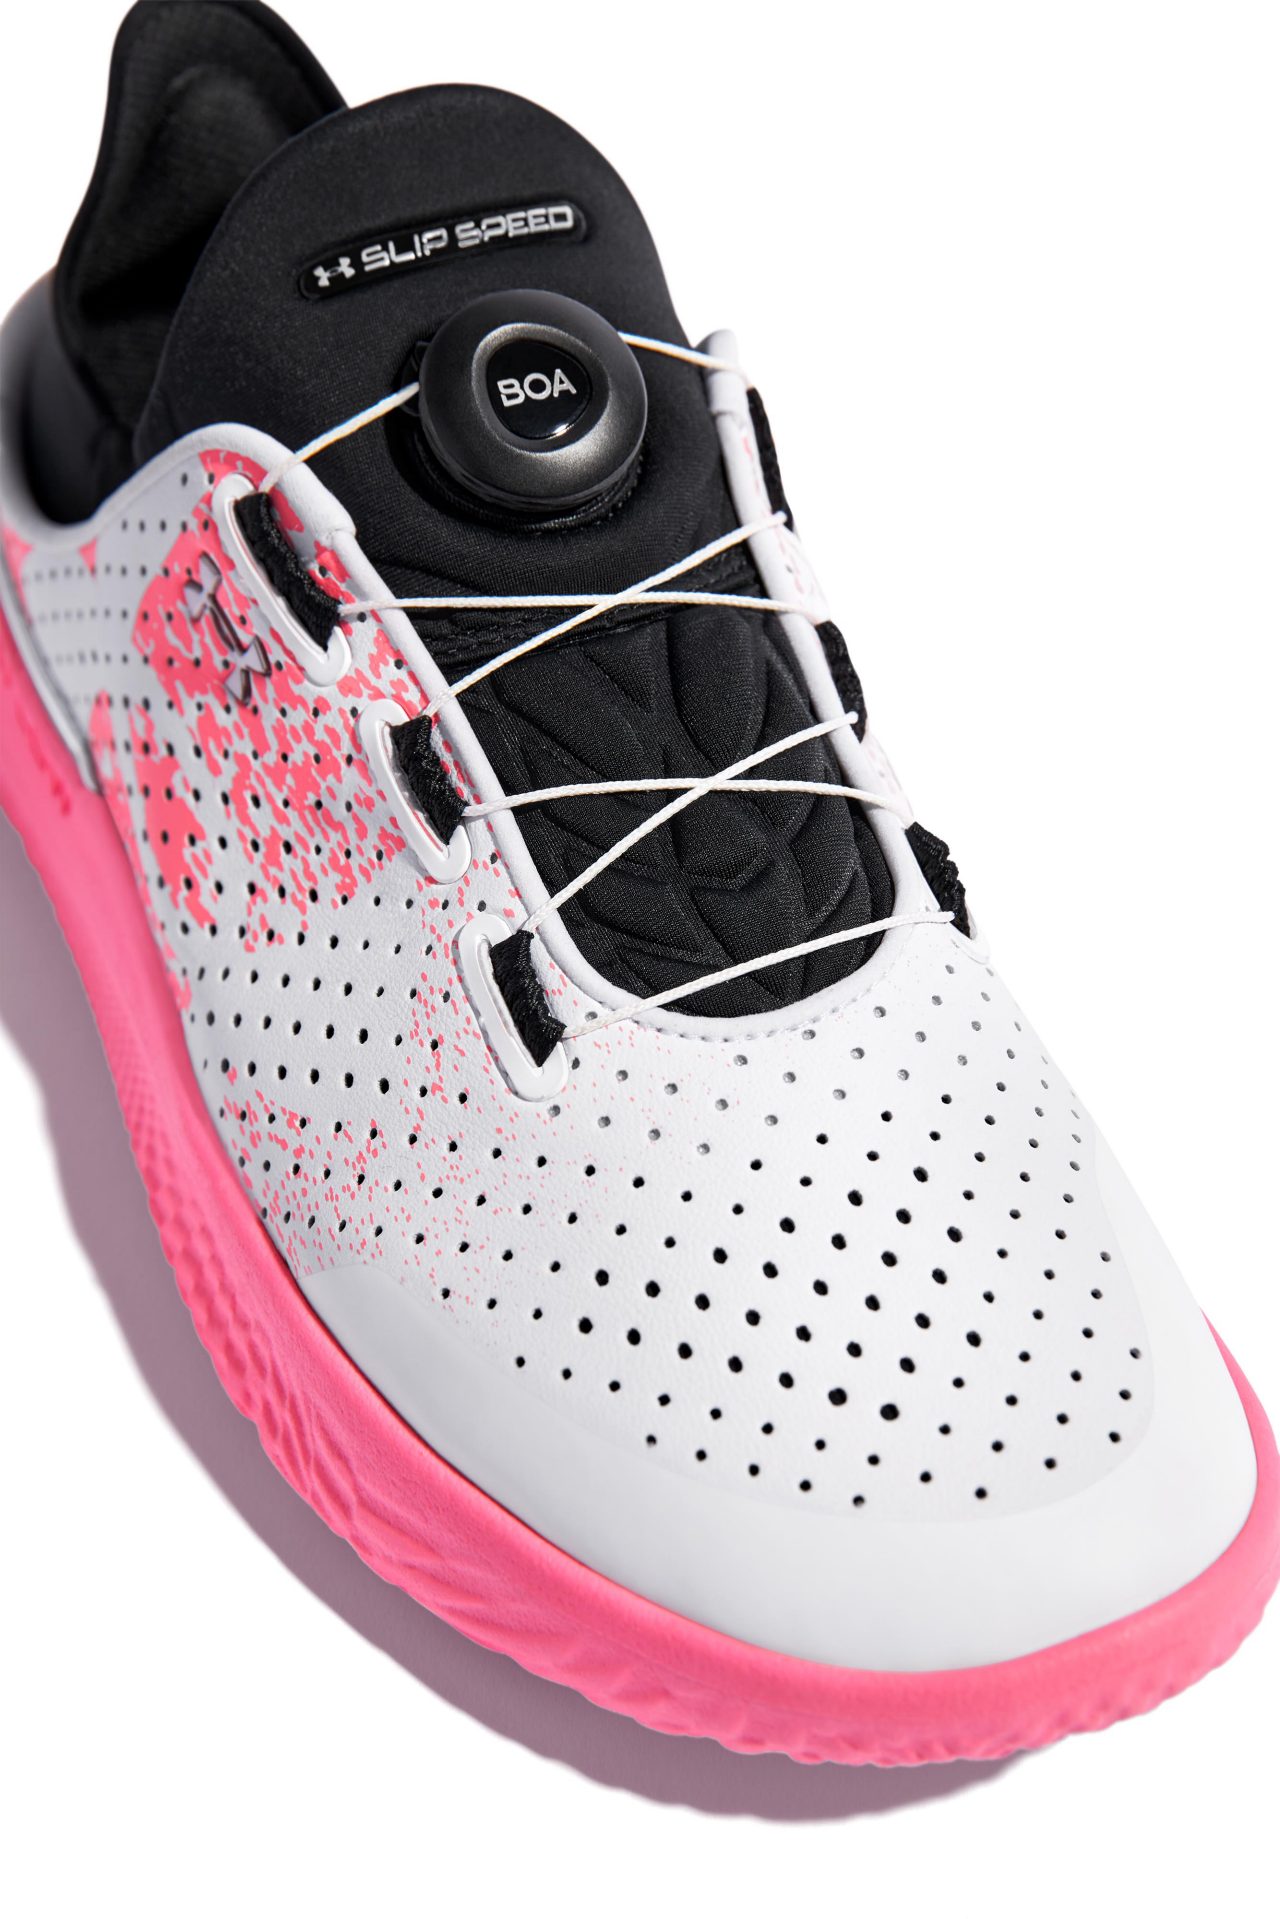 Supone Chorrito crítico Introducing UA SlipSpeed, Under Armour's Most Versatile Training Shoe  Designed for Athletes